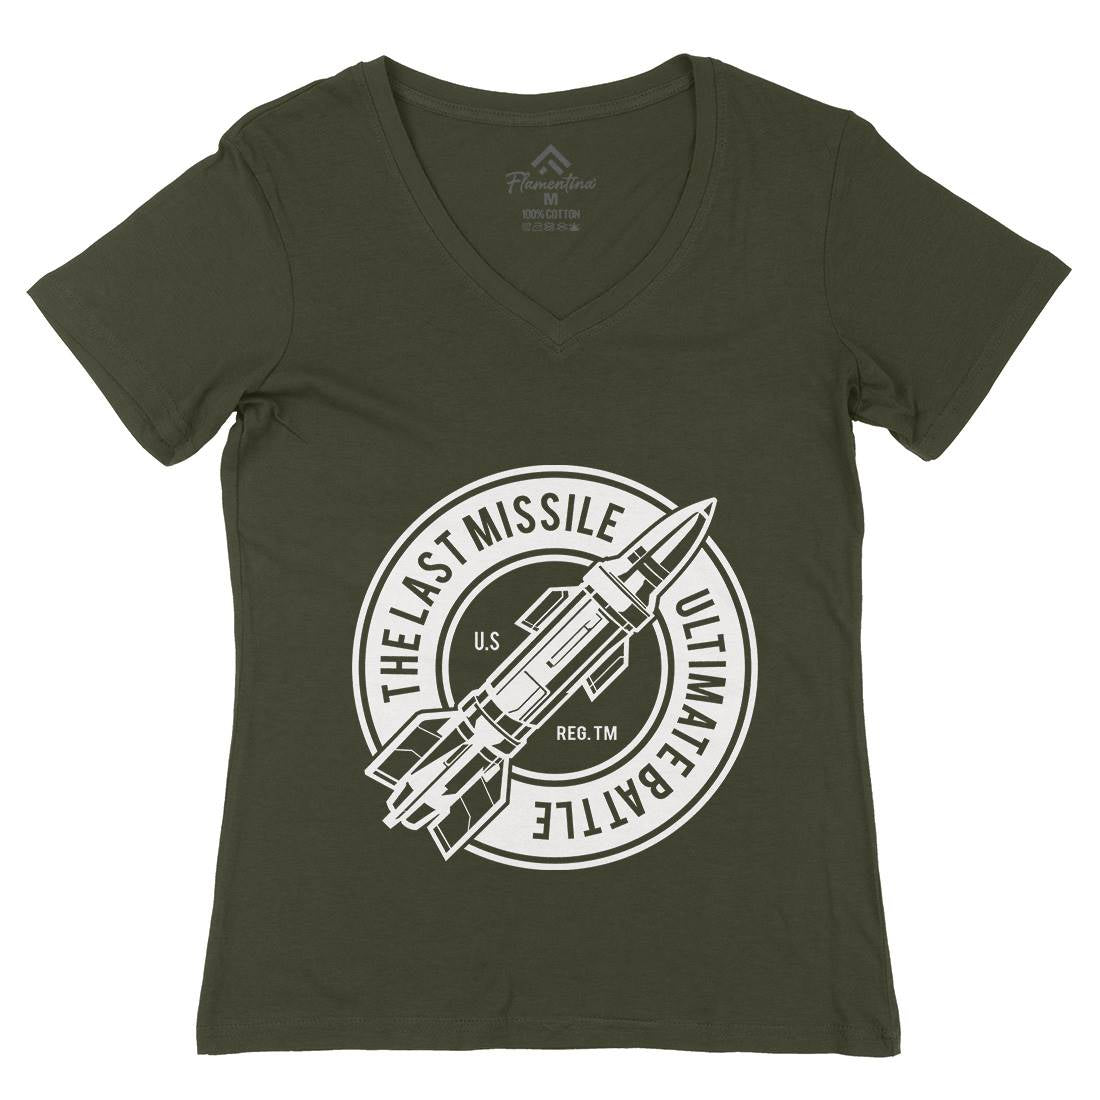 Last Missile Womens Organic V-Neck T-Shirt Army A175